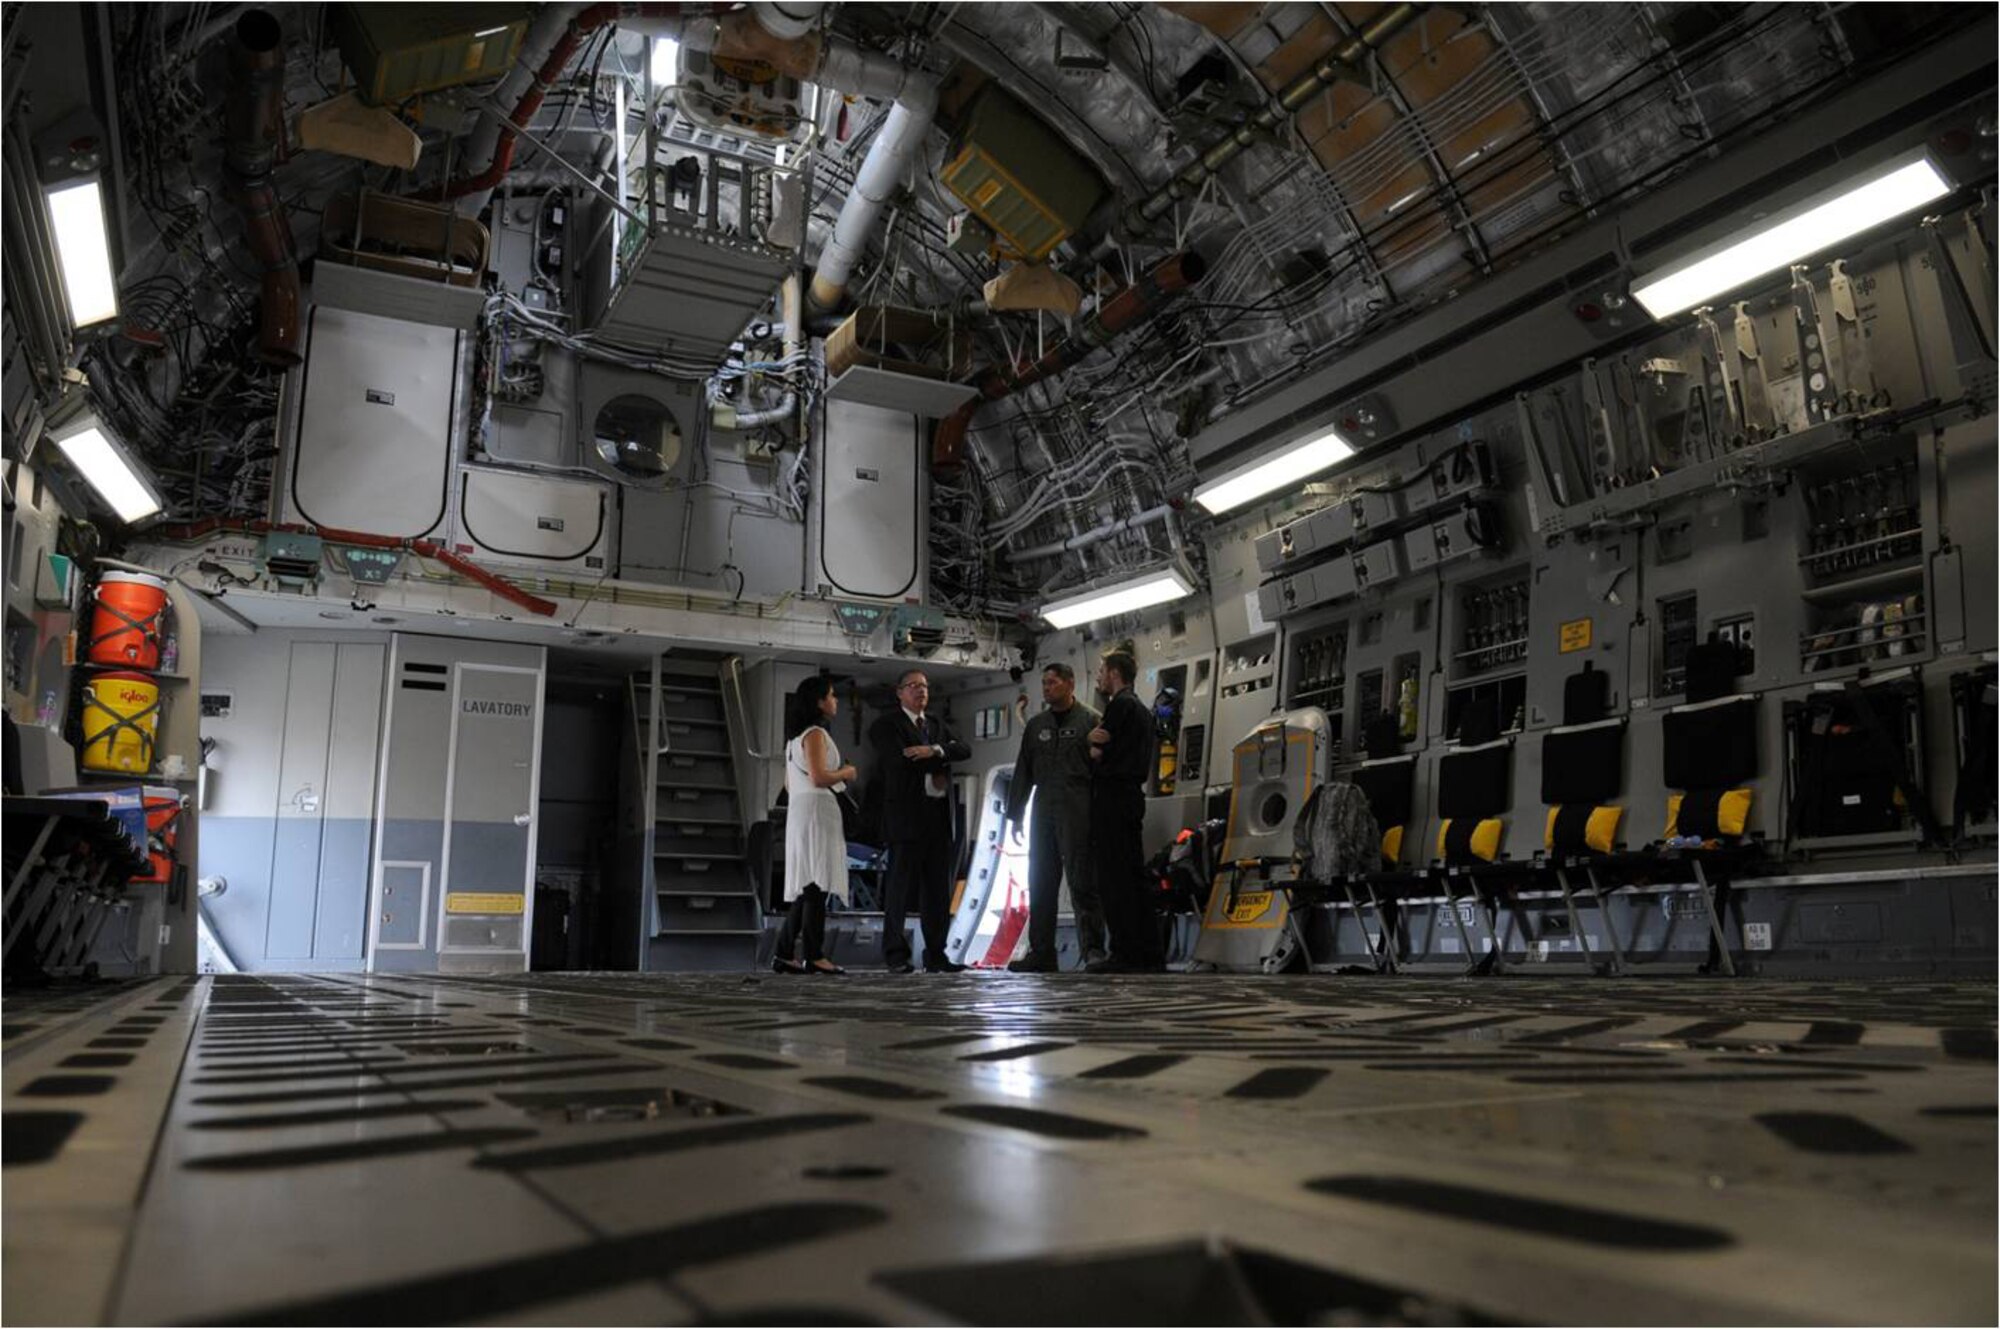 FARNBOROUGH, United Kingdom -- Spectators  tour the cargo bay of a C-17 Globemaster from Travis Air Force Base, Calif., here July 20.  Eleven U.S. military aircraft and approximately 70 personnel representing all branches of service participate in the 2010 Farnborough International Air Show that takes place July 19-25. (U.S. Air Force photo/Staff Sgt. Jerry Fleshman)
